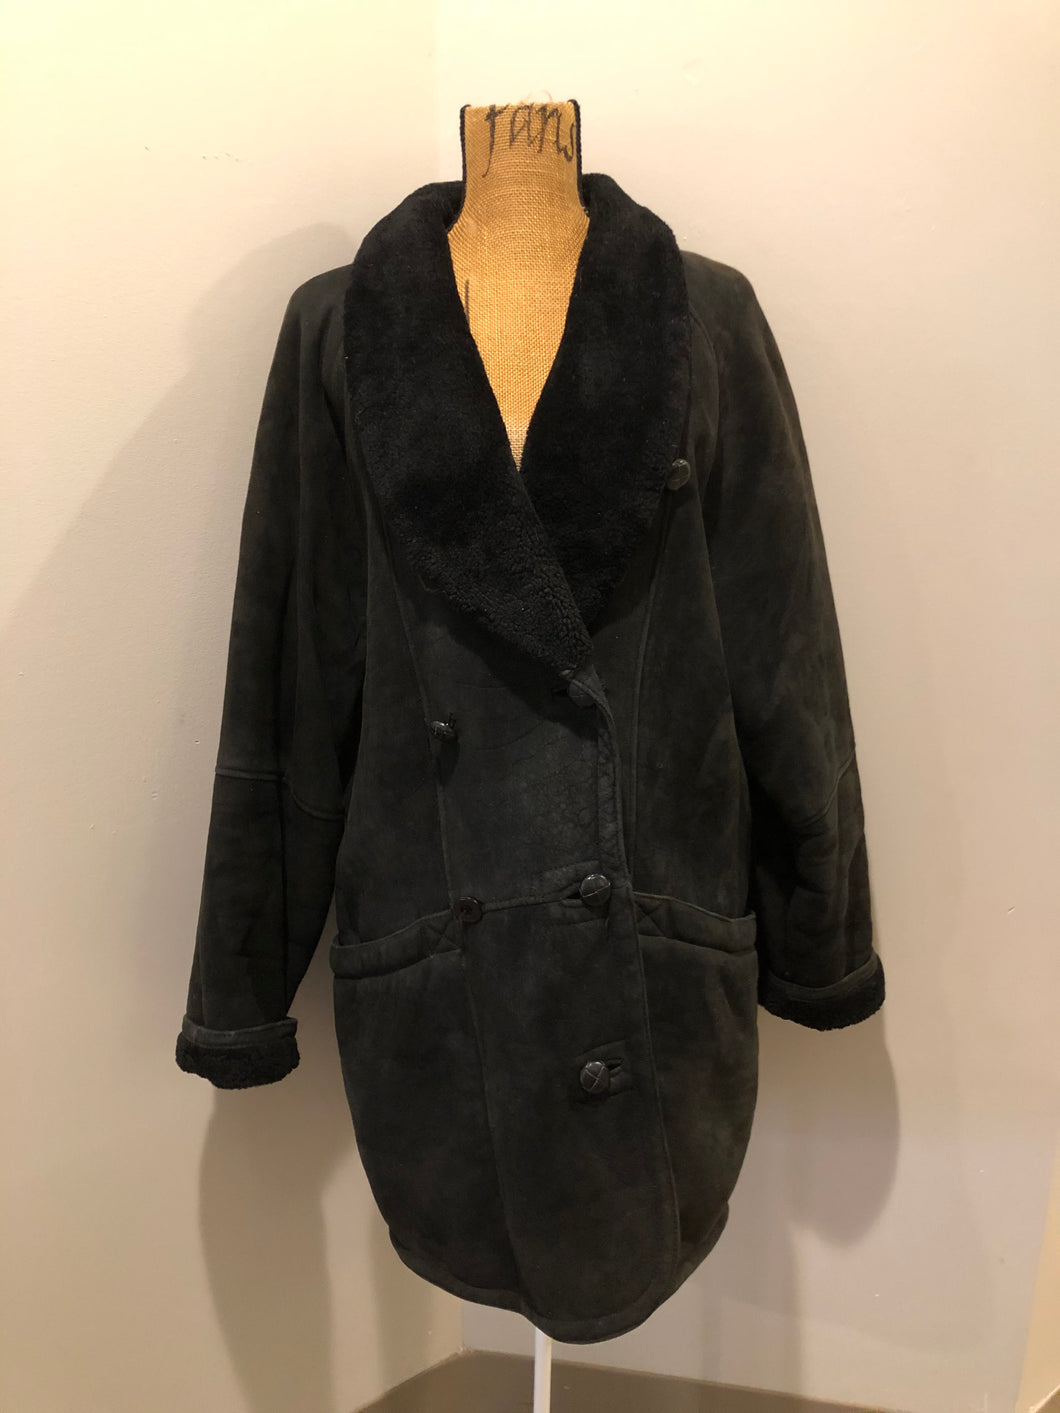 Kingspier Vintage - Danier black suede coat with shearling trim and lining, shawl collar, button closures and pockets. Made in Canada. Size medium.